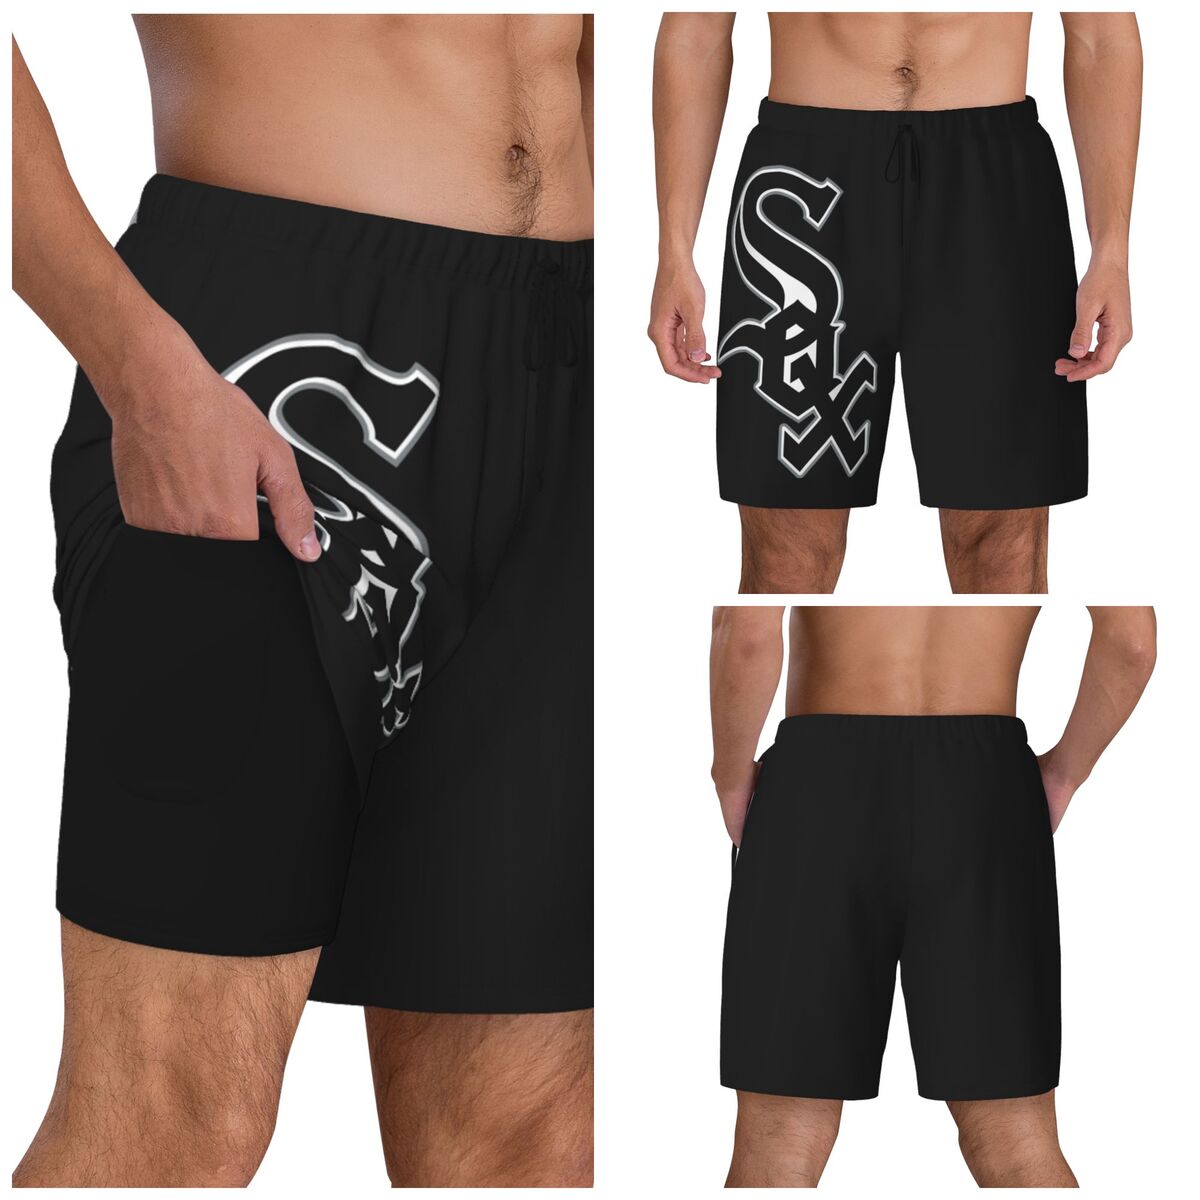 Chicago White Sox Men's Swim Trunks with Compression Liner